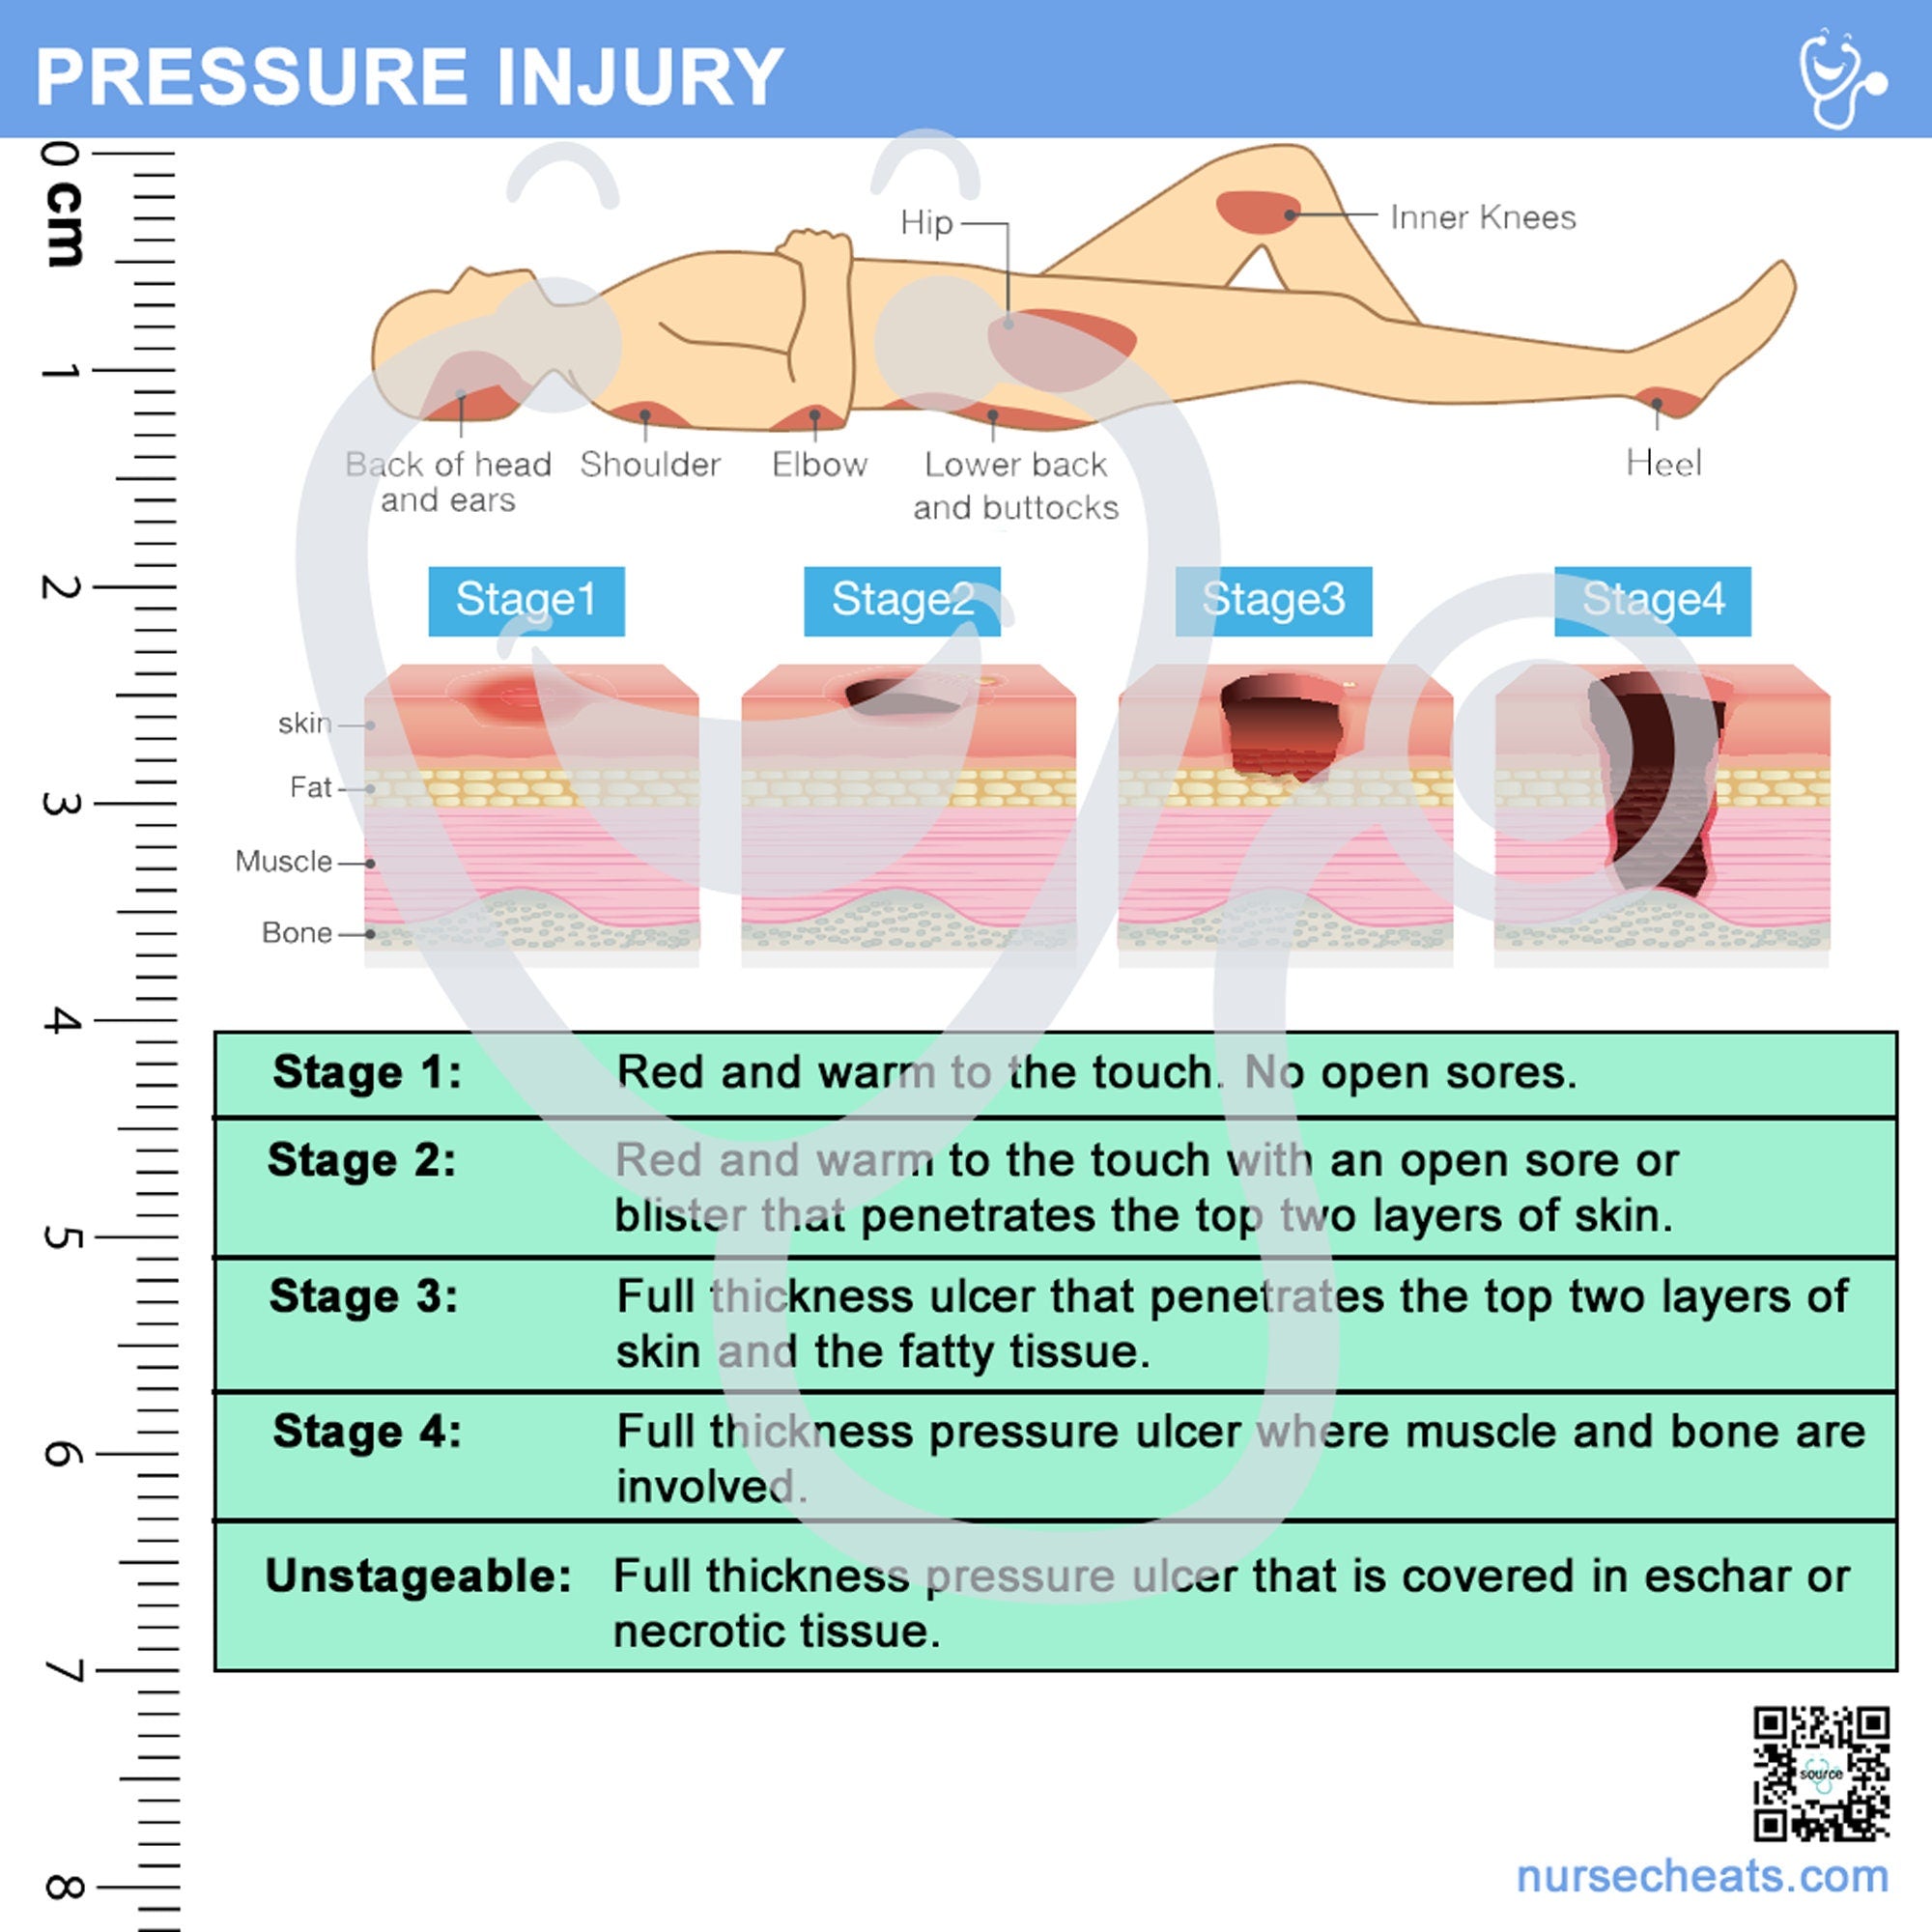 Side two of our Wound care badge buddy contains pressure injury classification as well as staging.